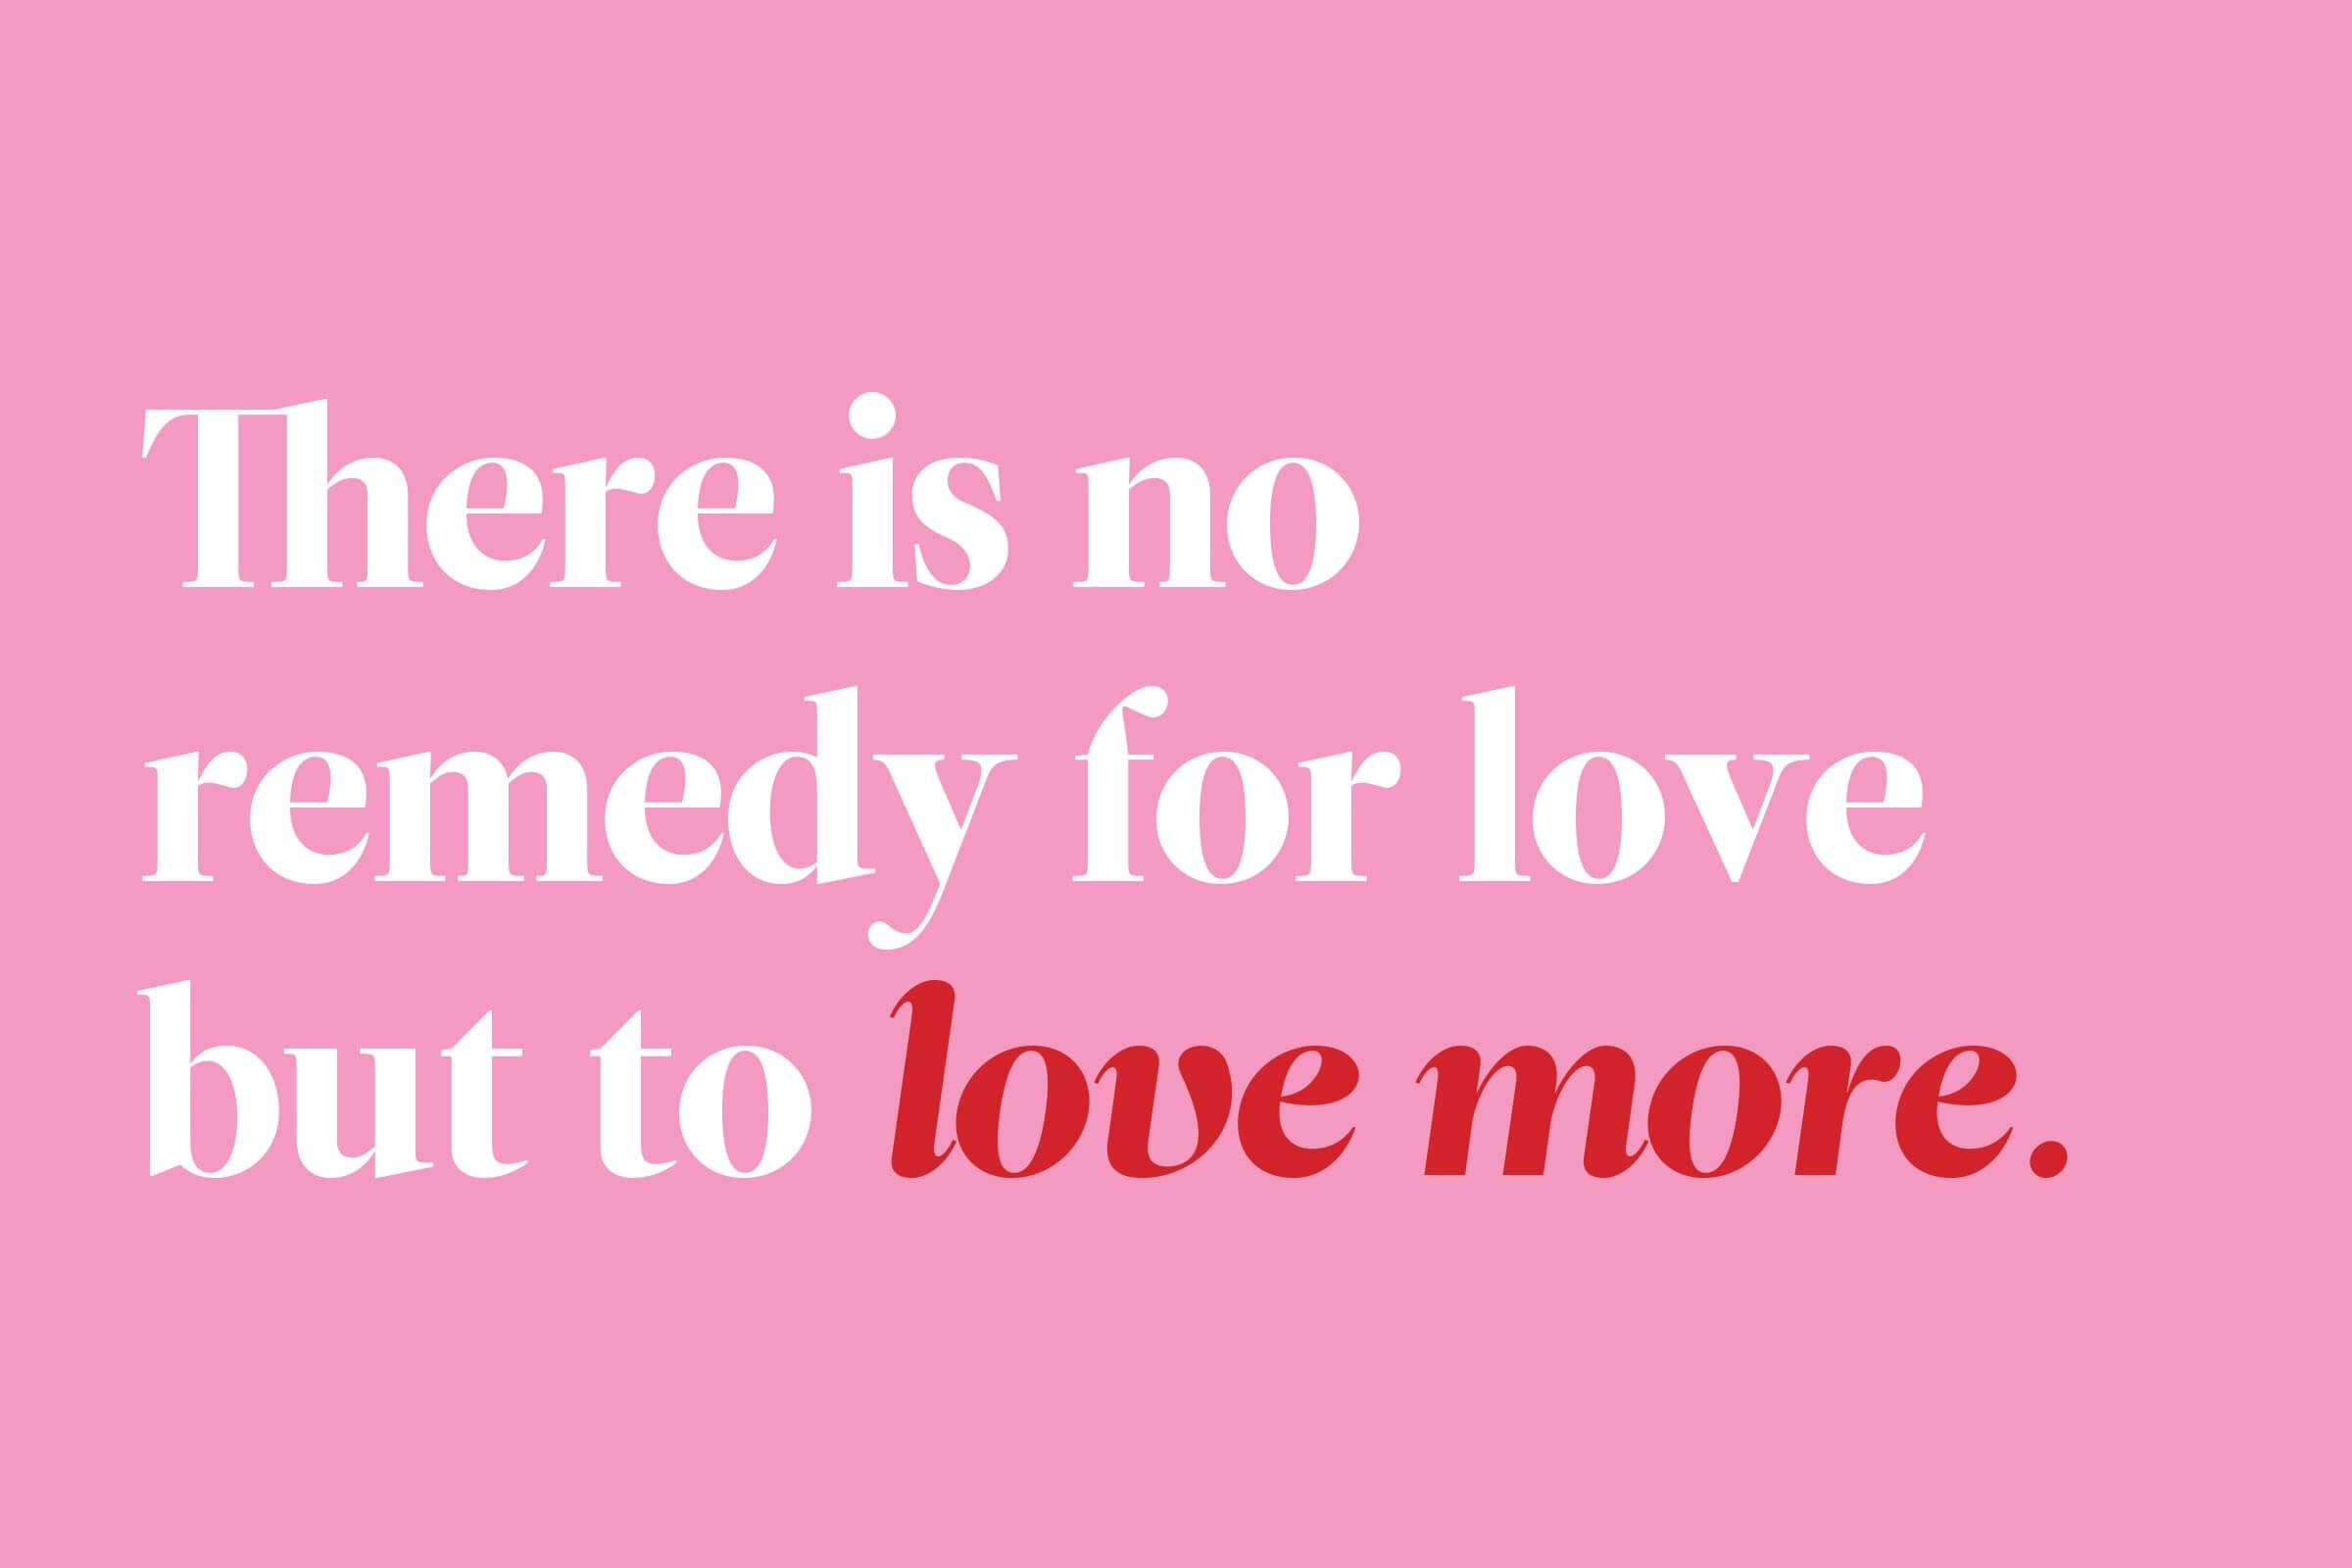 Valentine's Day Quotes You Can Add to Your Cards | Reader's Digest